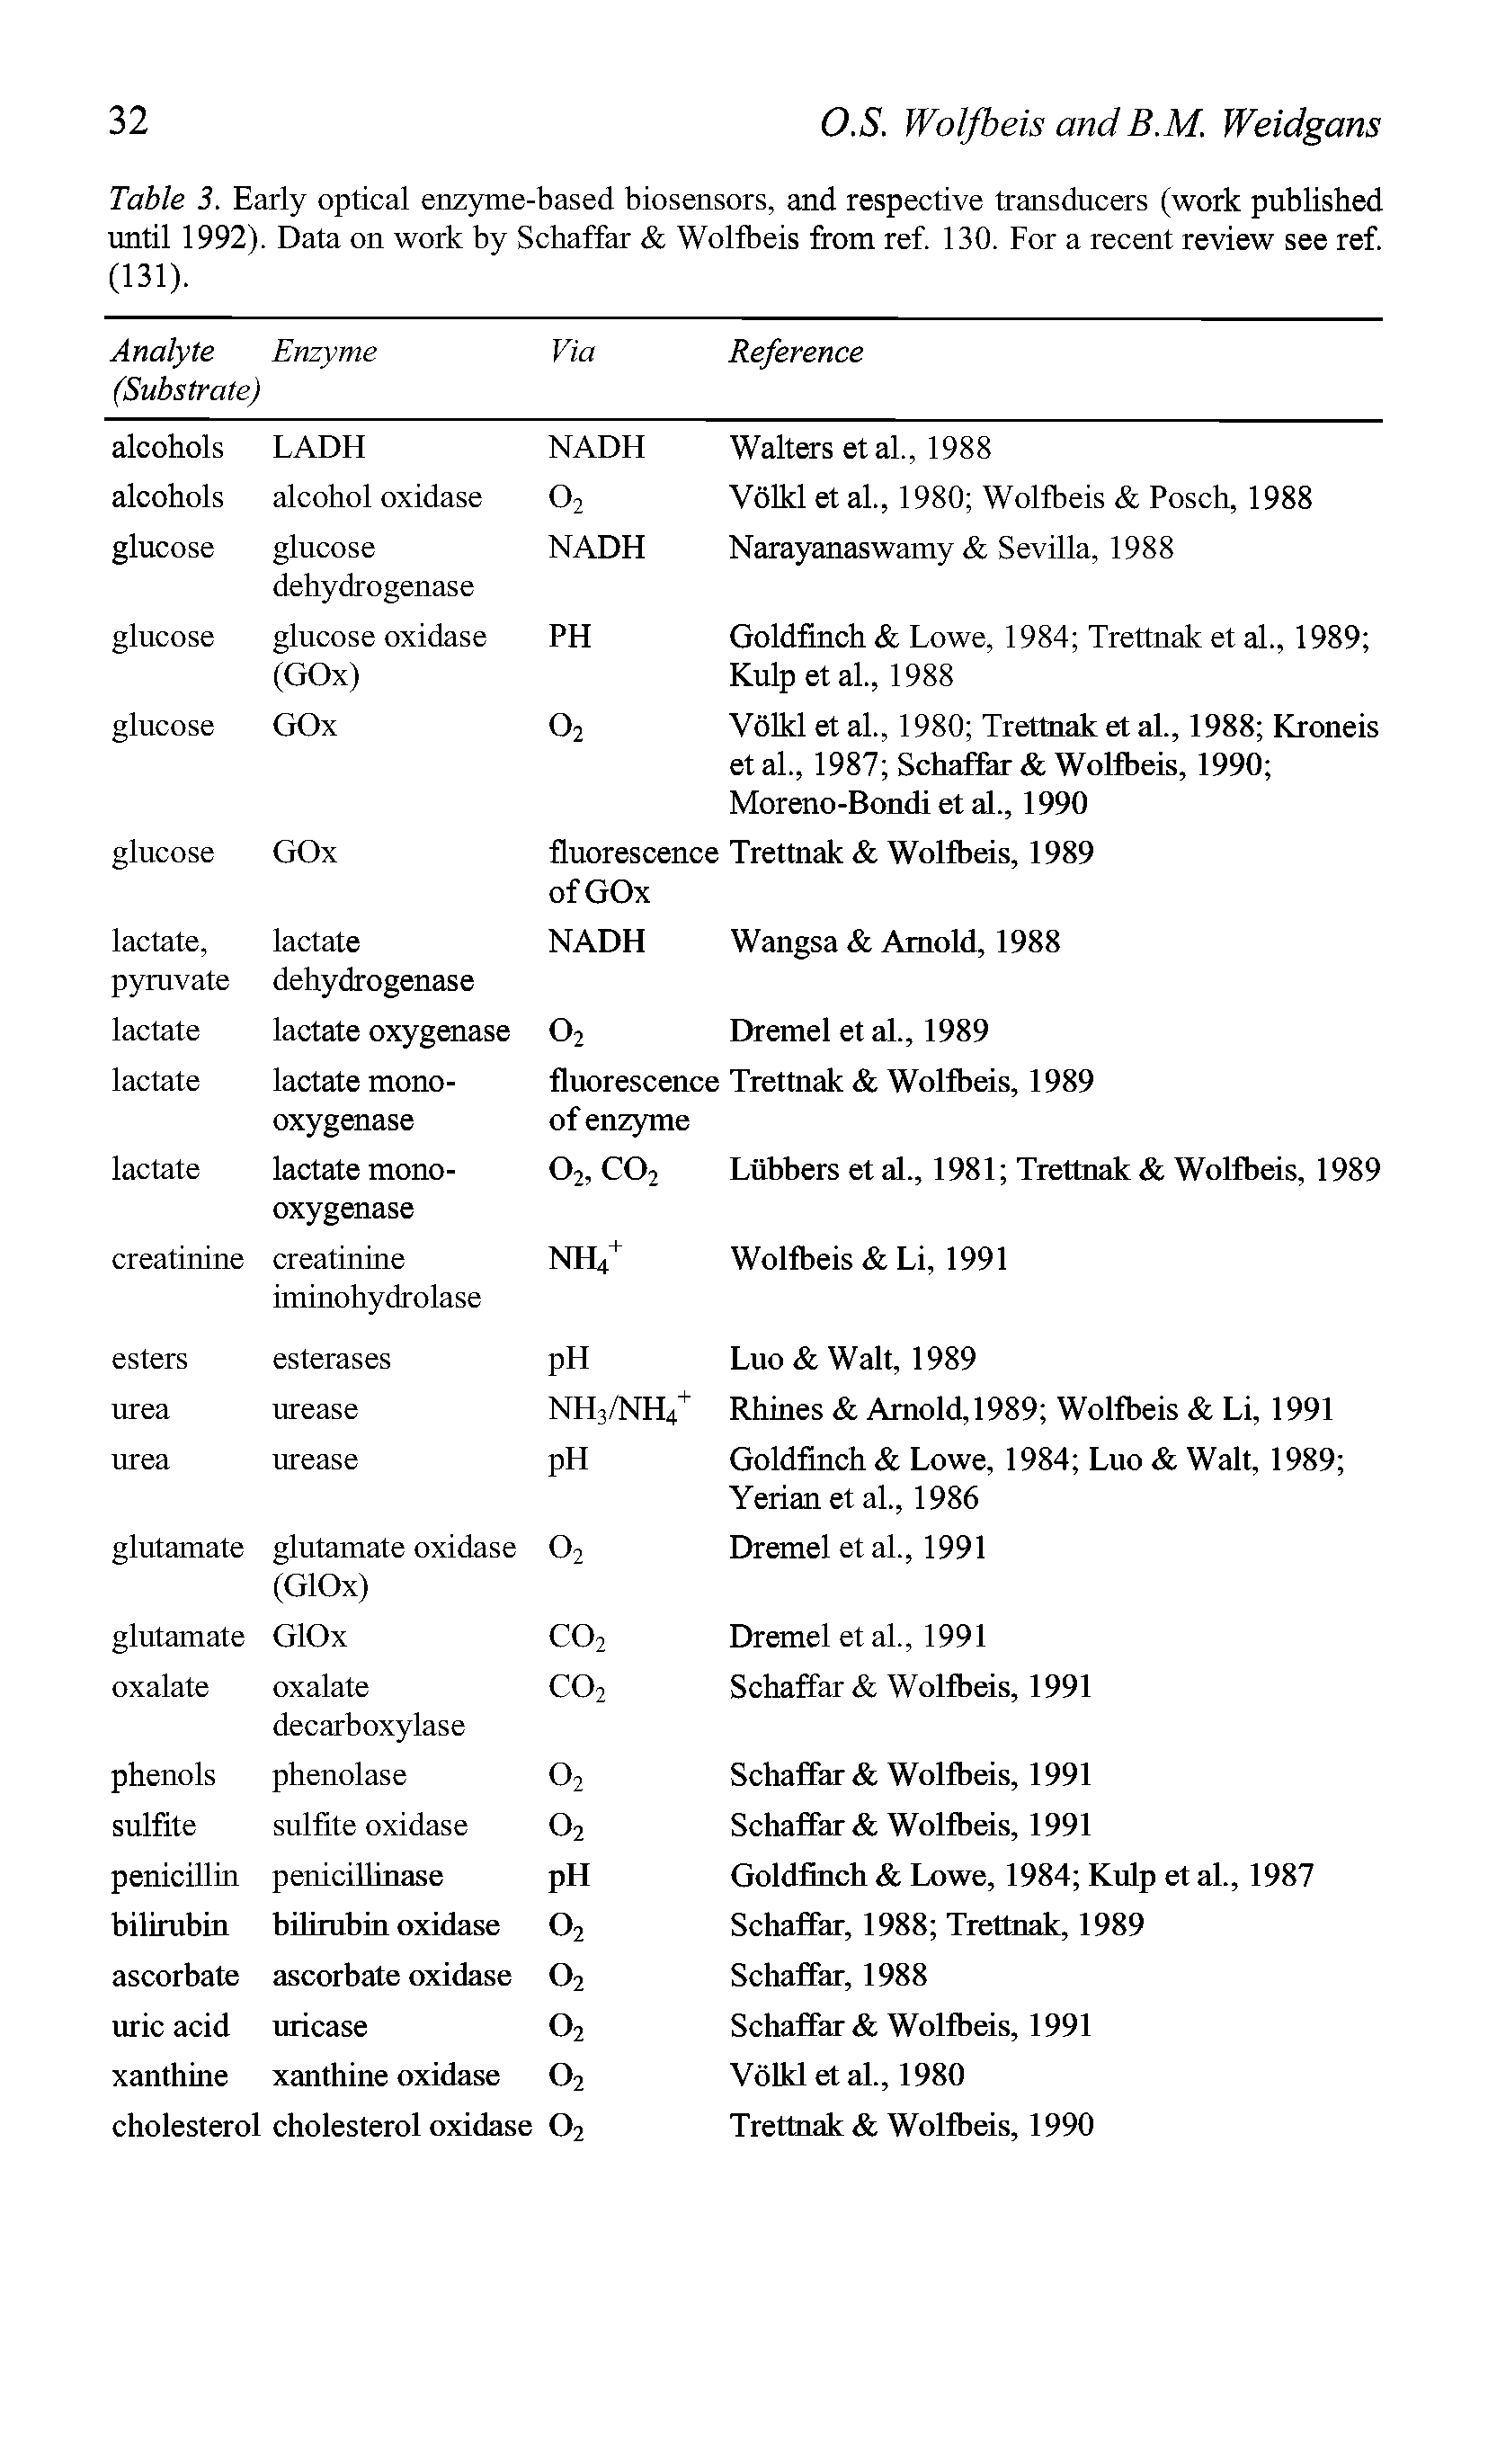 Table 3. Early optical enzyme-based biosensors, and respective transducers (work published until 1992). Data on work by Schaffar Wolfbeis from ref. 130. For a recent review see ref. (131).